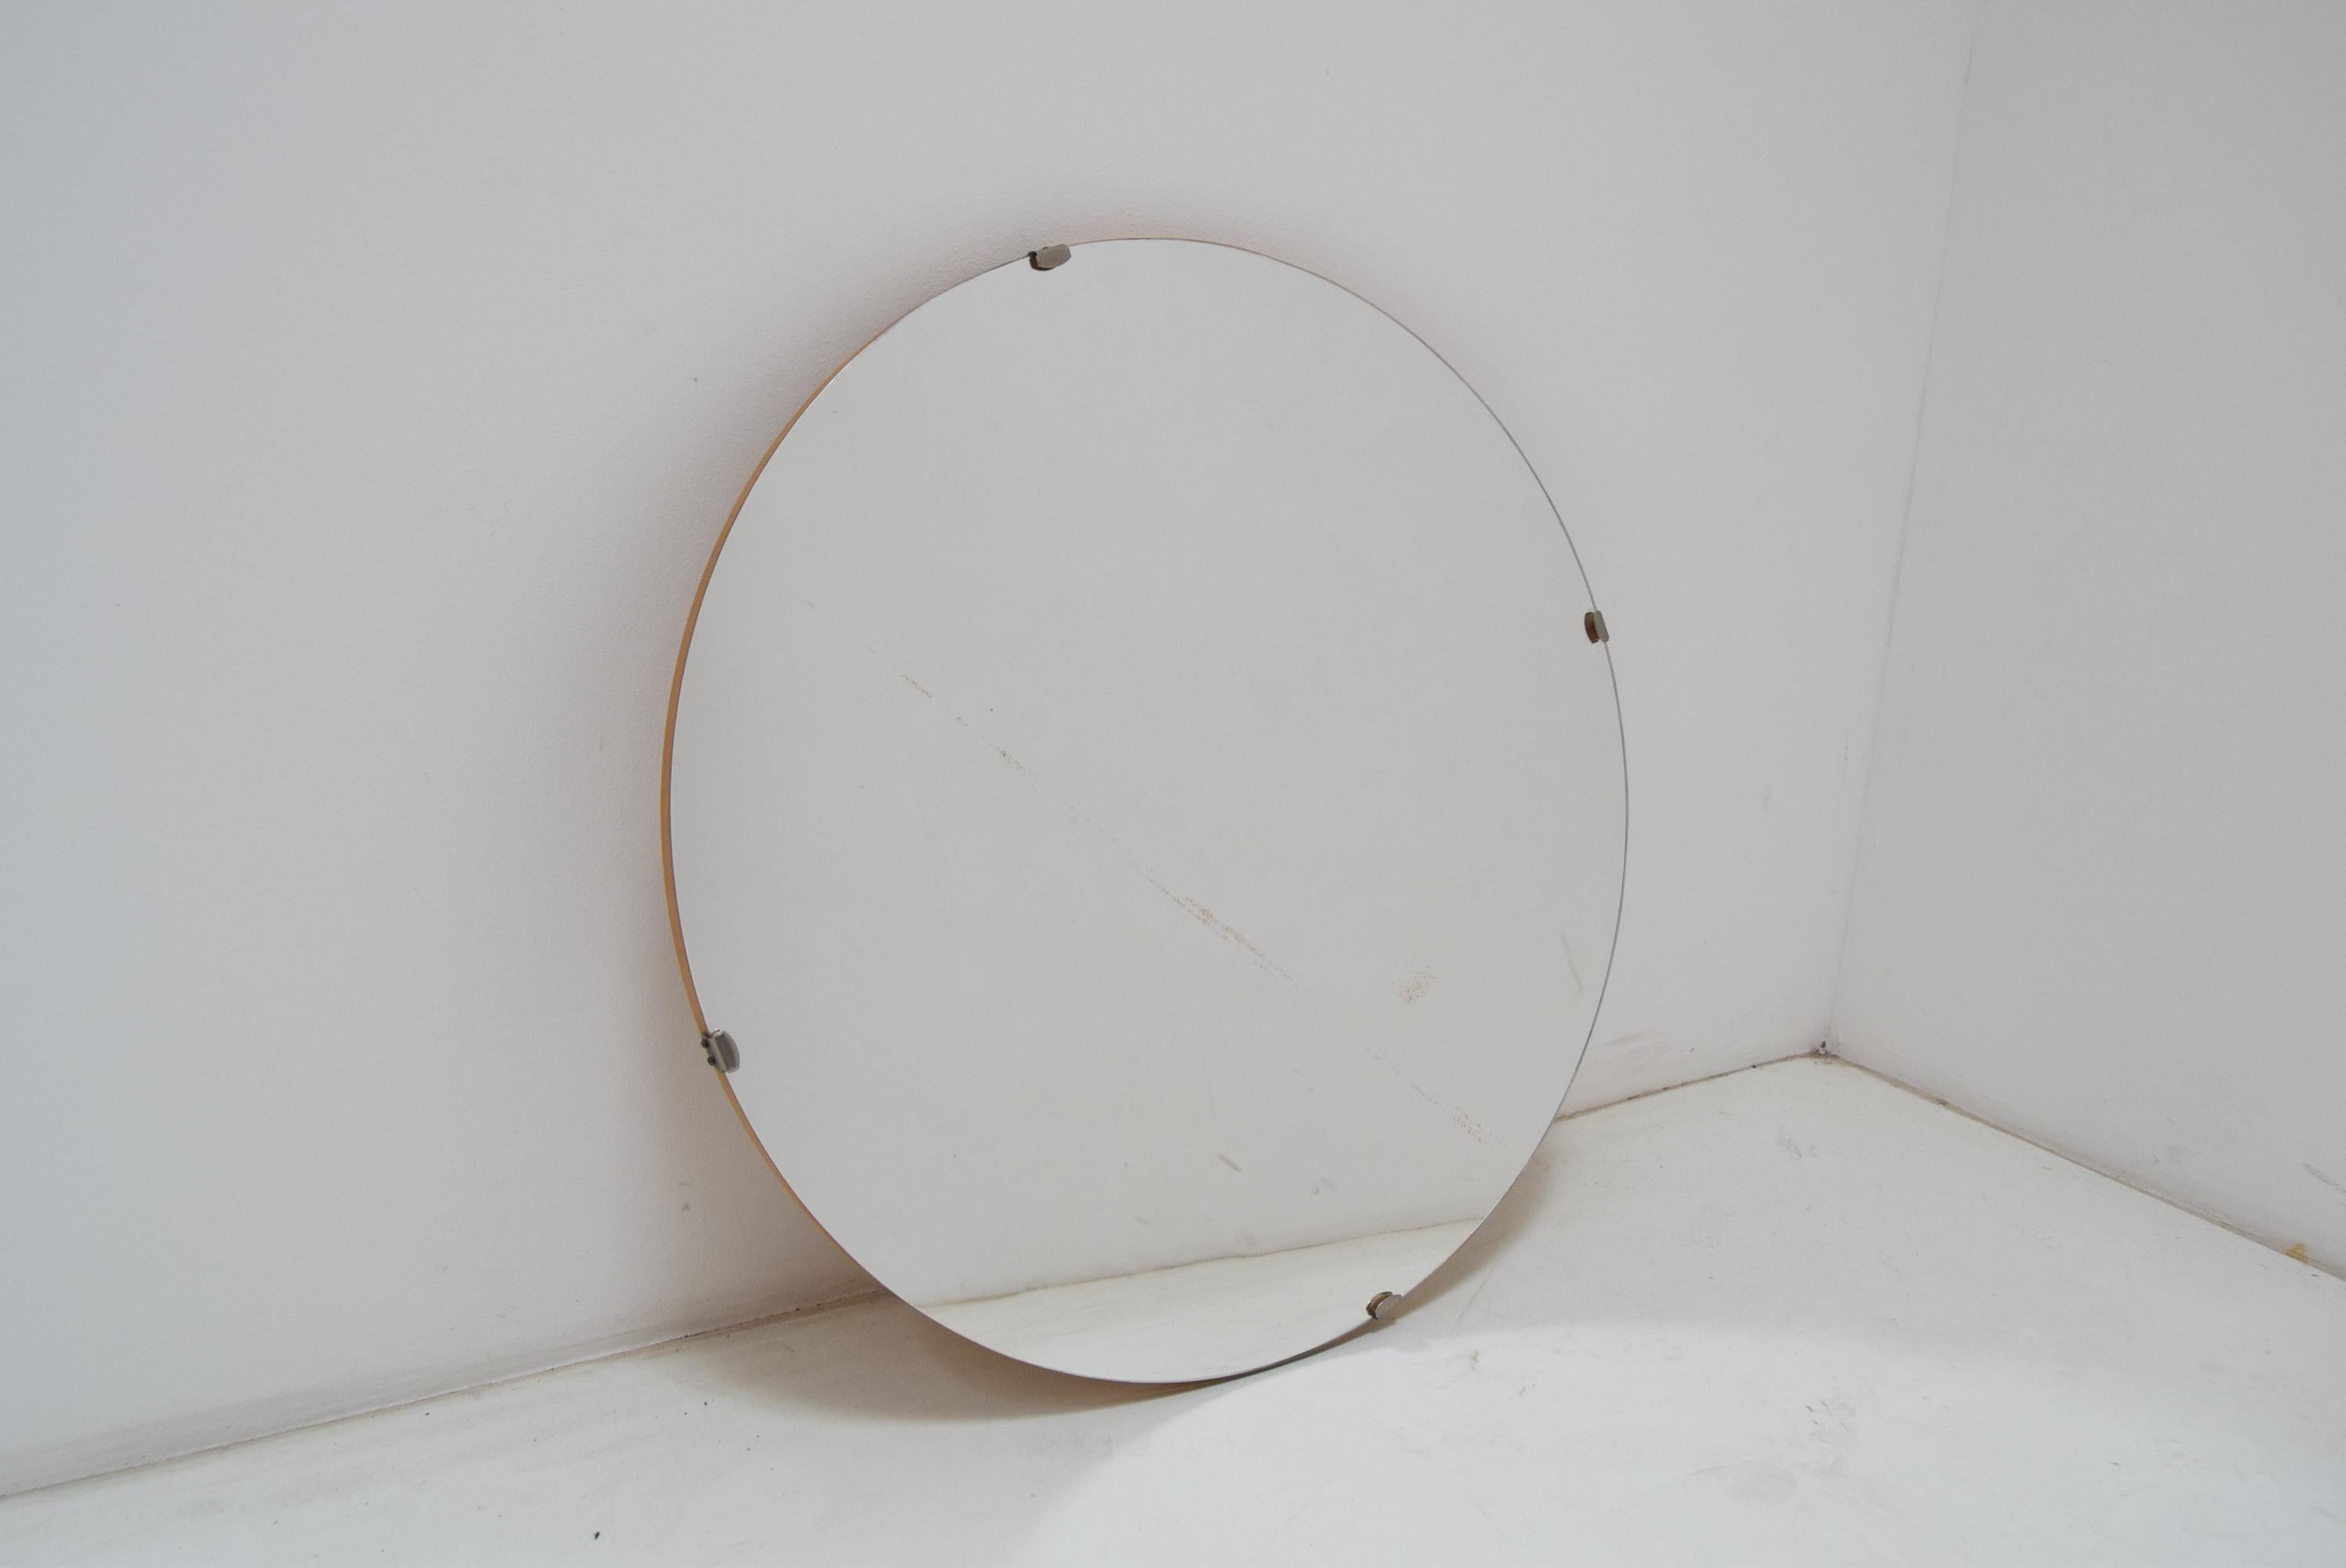 Made of mirror, wood
Re-polished
Original condition.